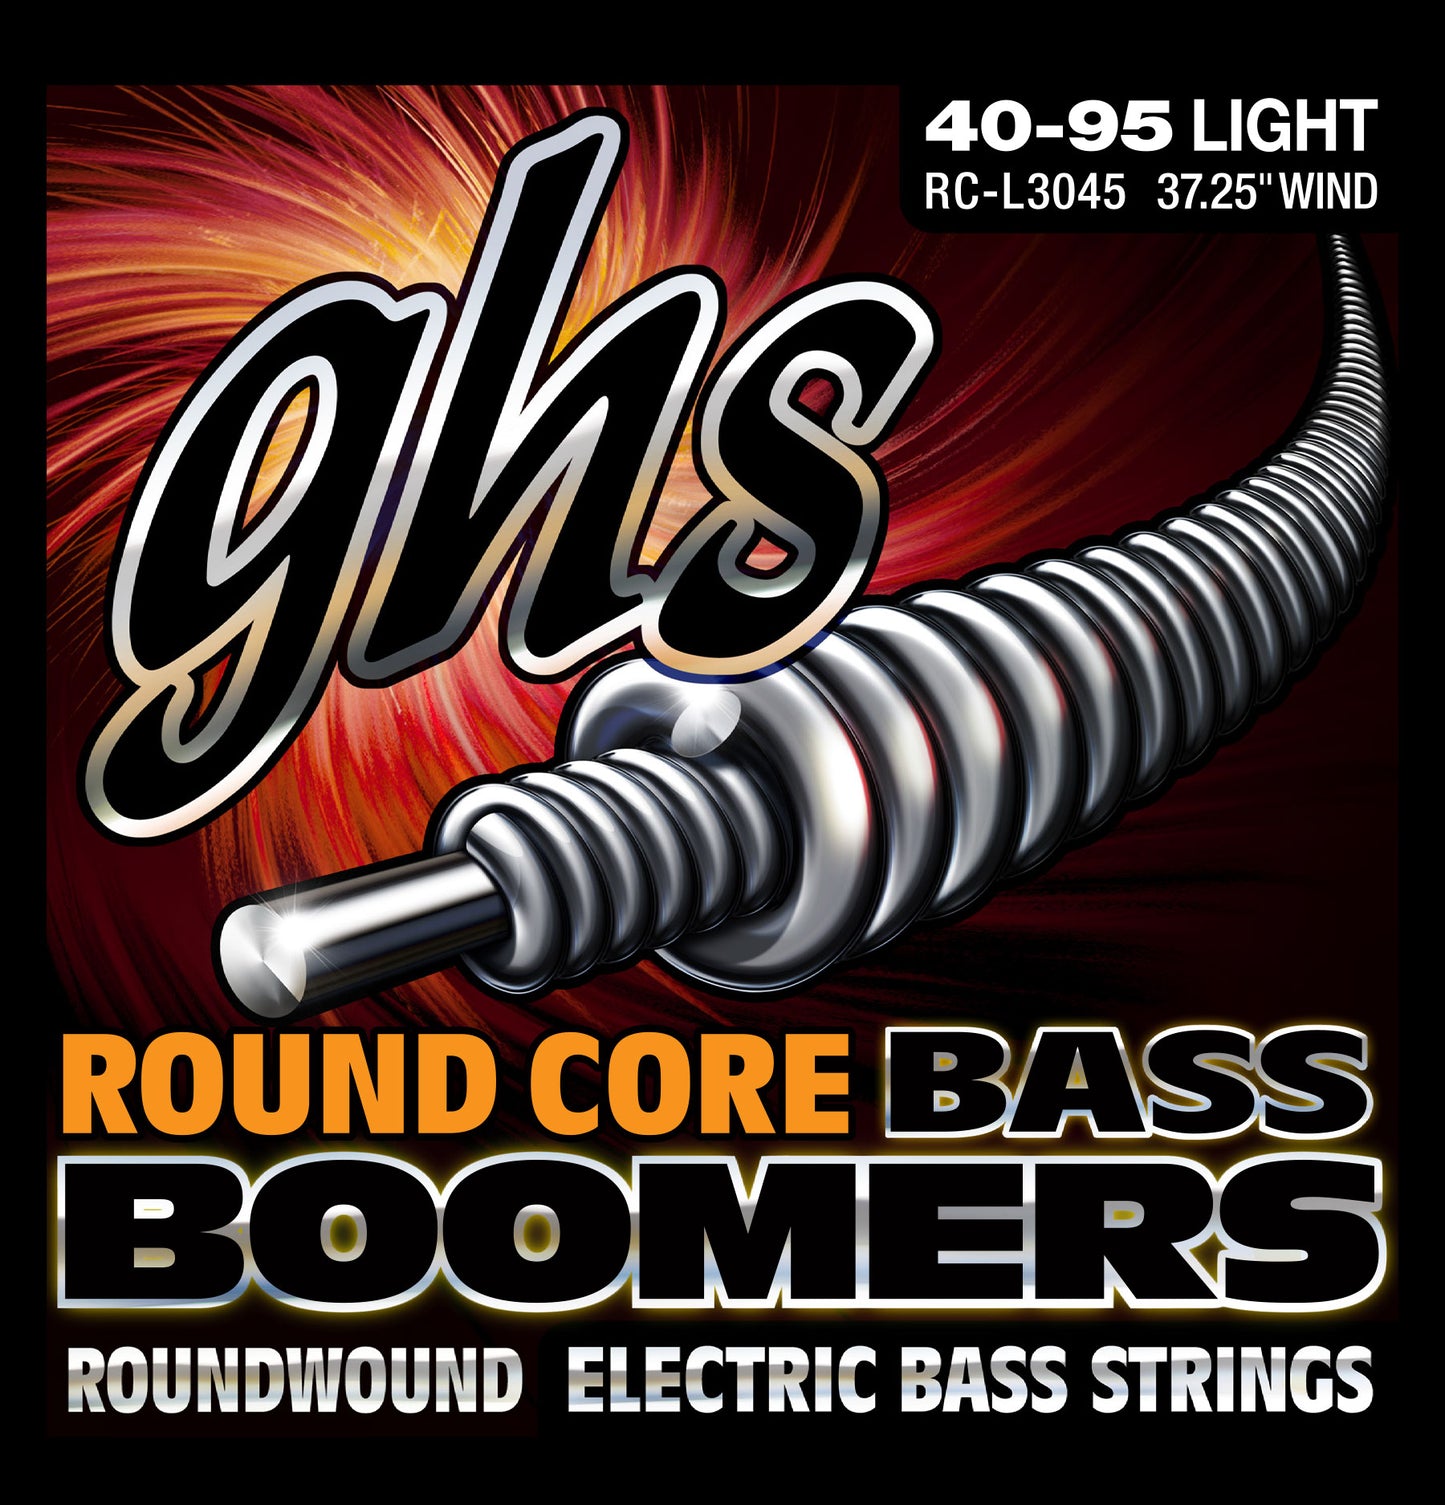 GHS Roundcore Bass Boomers, 4-String 40-95, RC-L3045